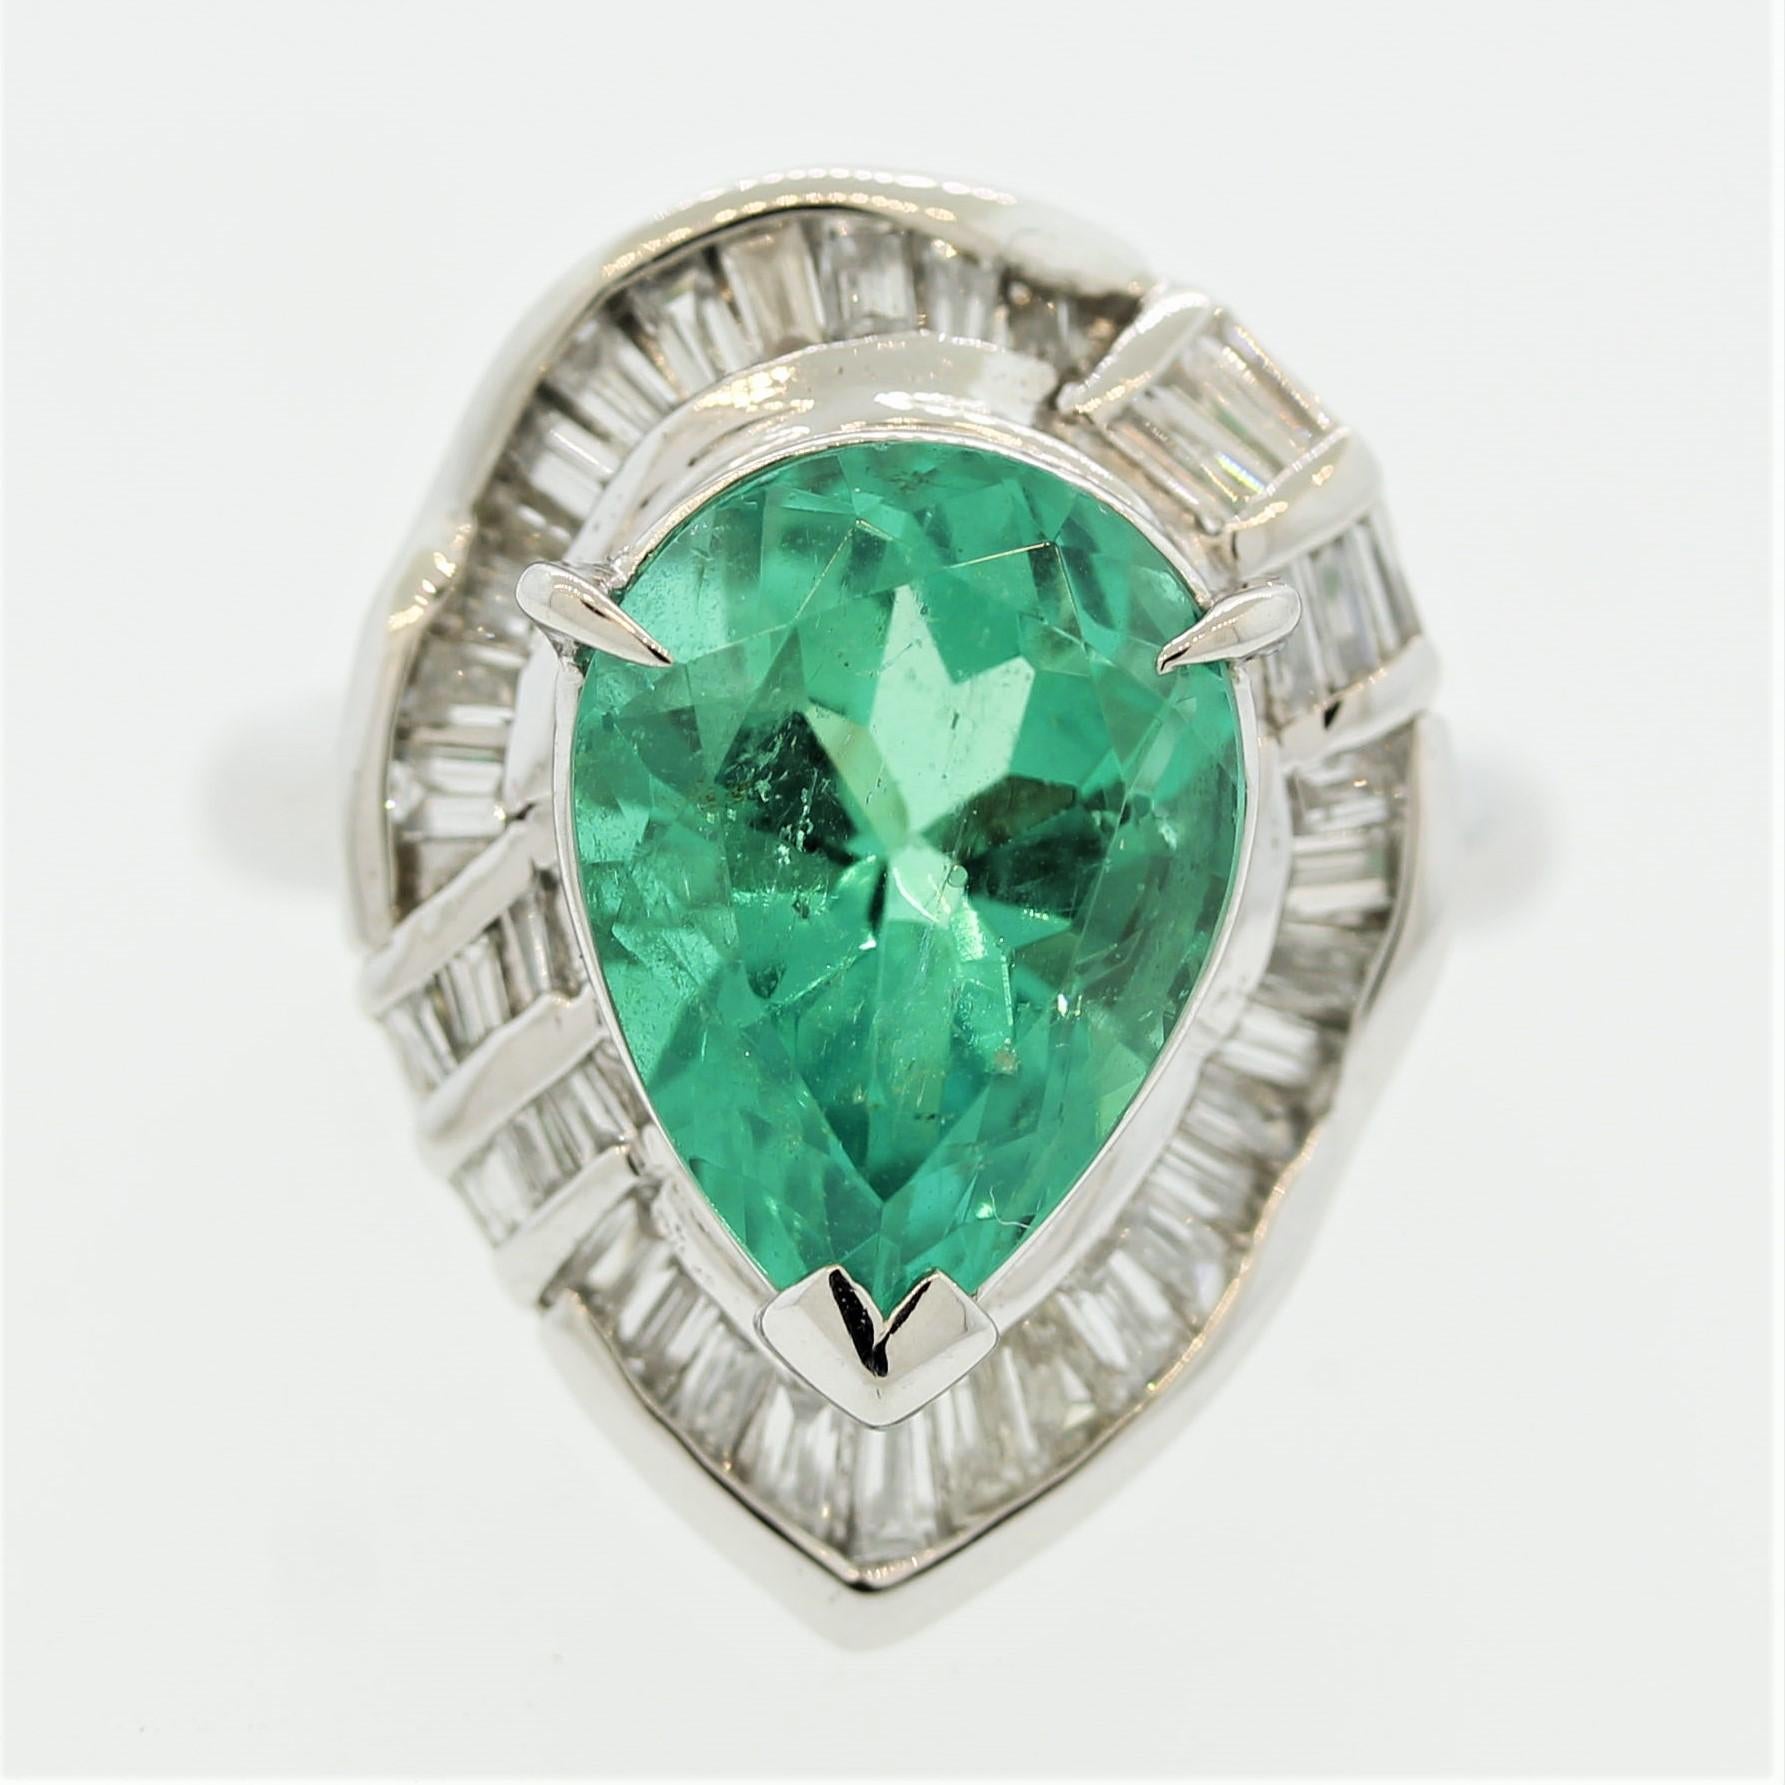 A lovely platinum made ring featuring a 4.38 carat pear-shape Colombian emerald. It has a bright gem green color with excellent brilliance and life. It is also very clean compared to most other emeralds allowing the stones natural brightness to